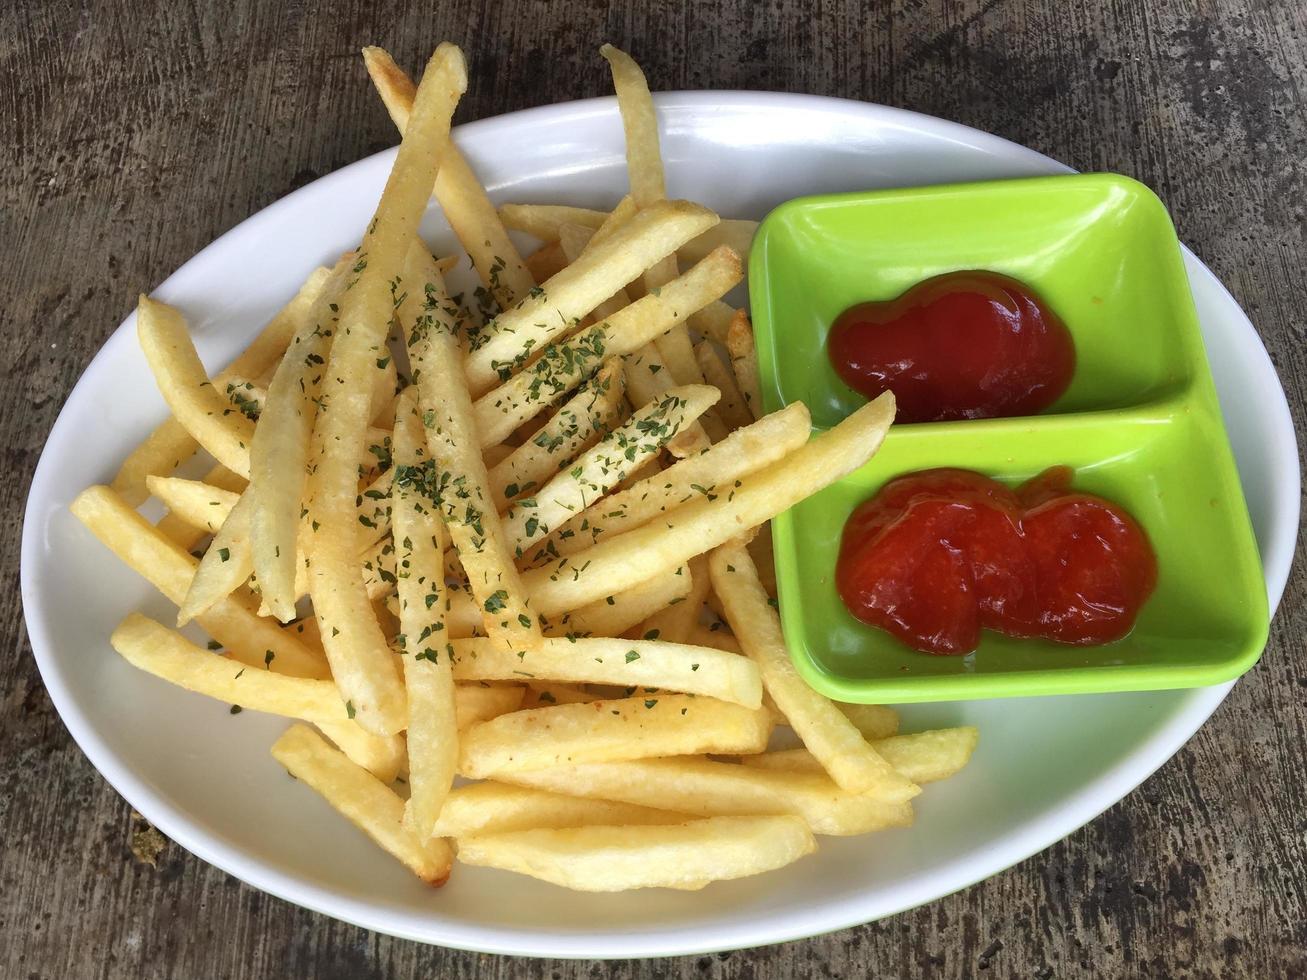 a plate of french fries complete with tomato sauce and hot sauce photo